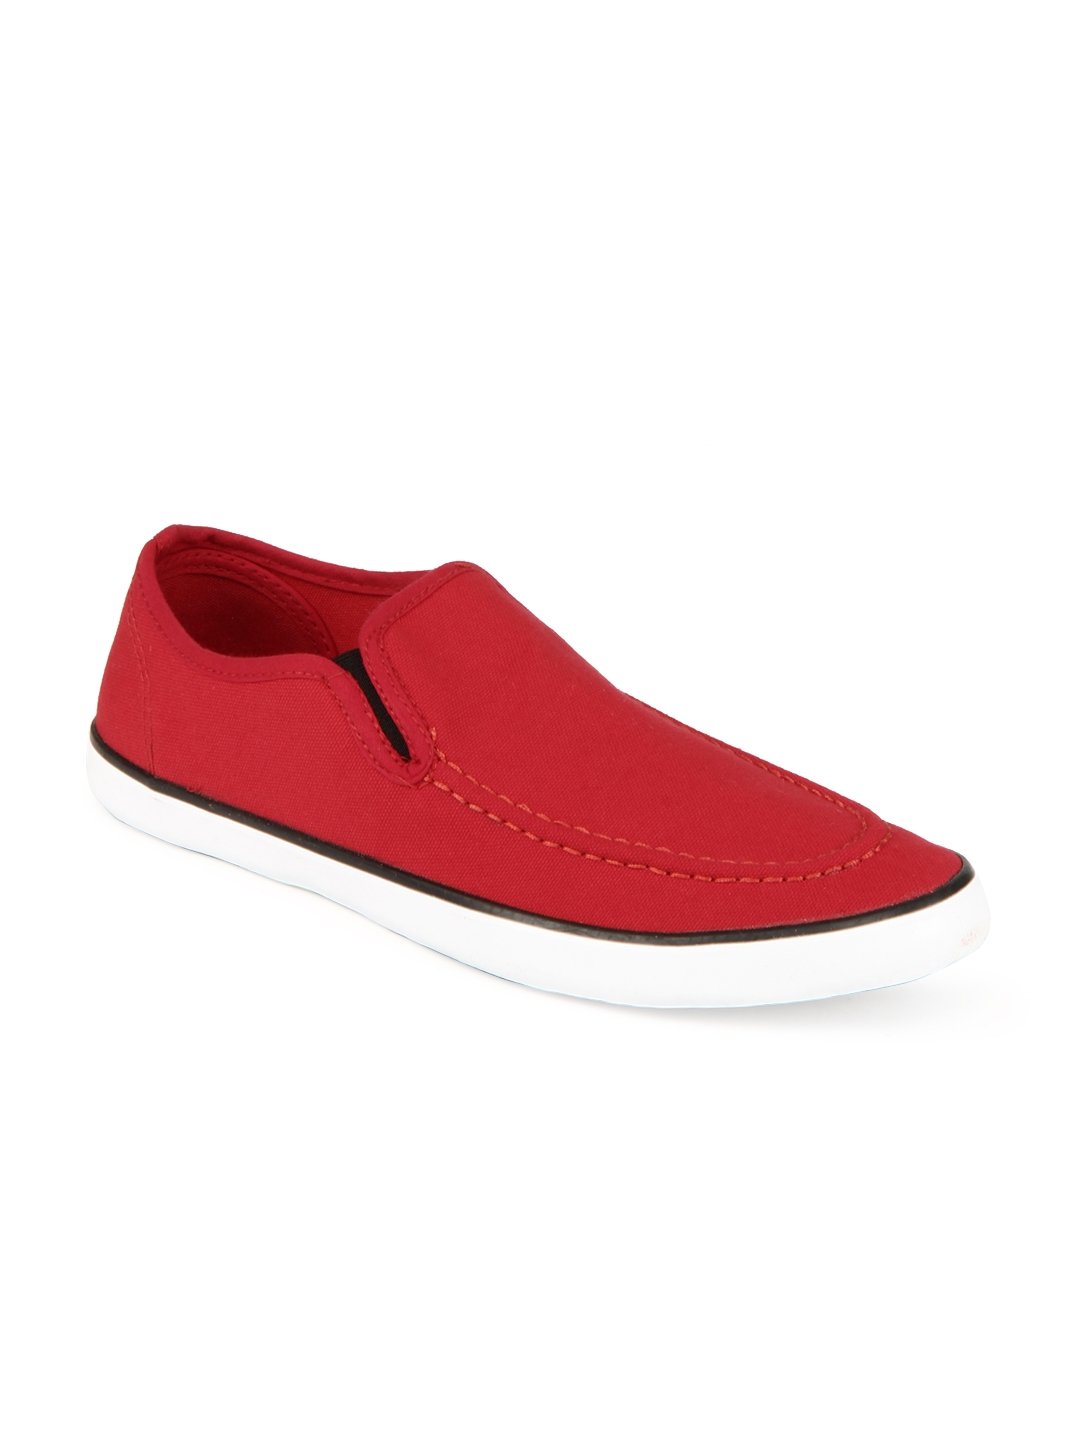 Buy Roadster Men Red Casual Shoes - Casual Shoes for Men 111496 | Myntra